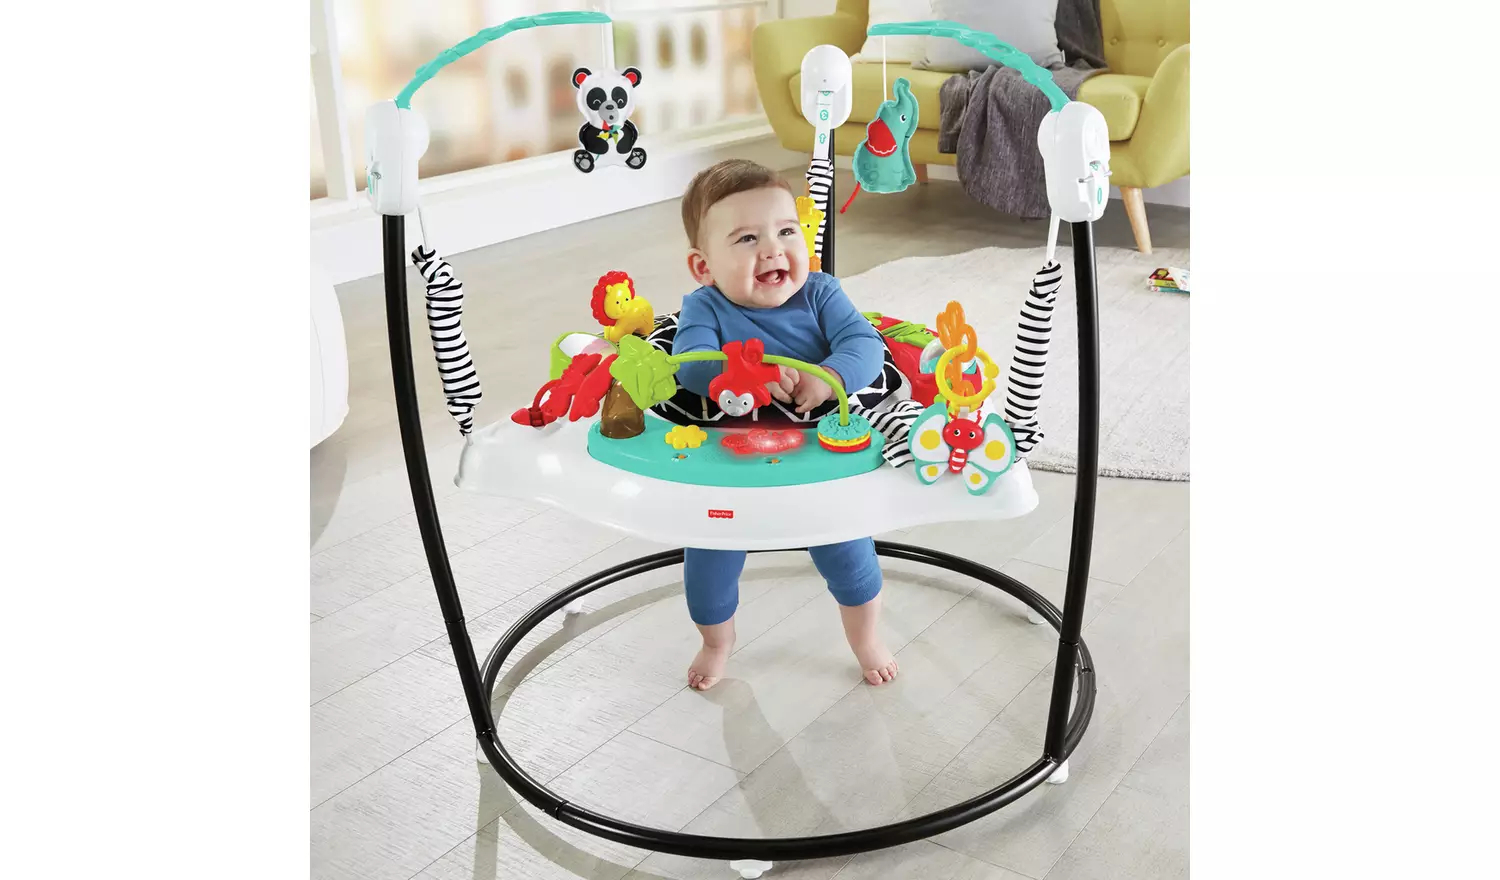 FisherPrice Animal Wonders Jumperoo with click and